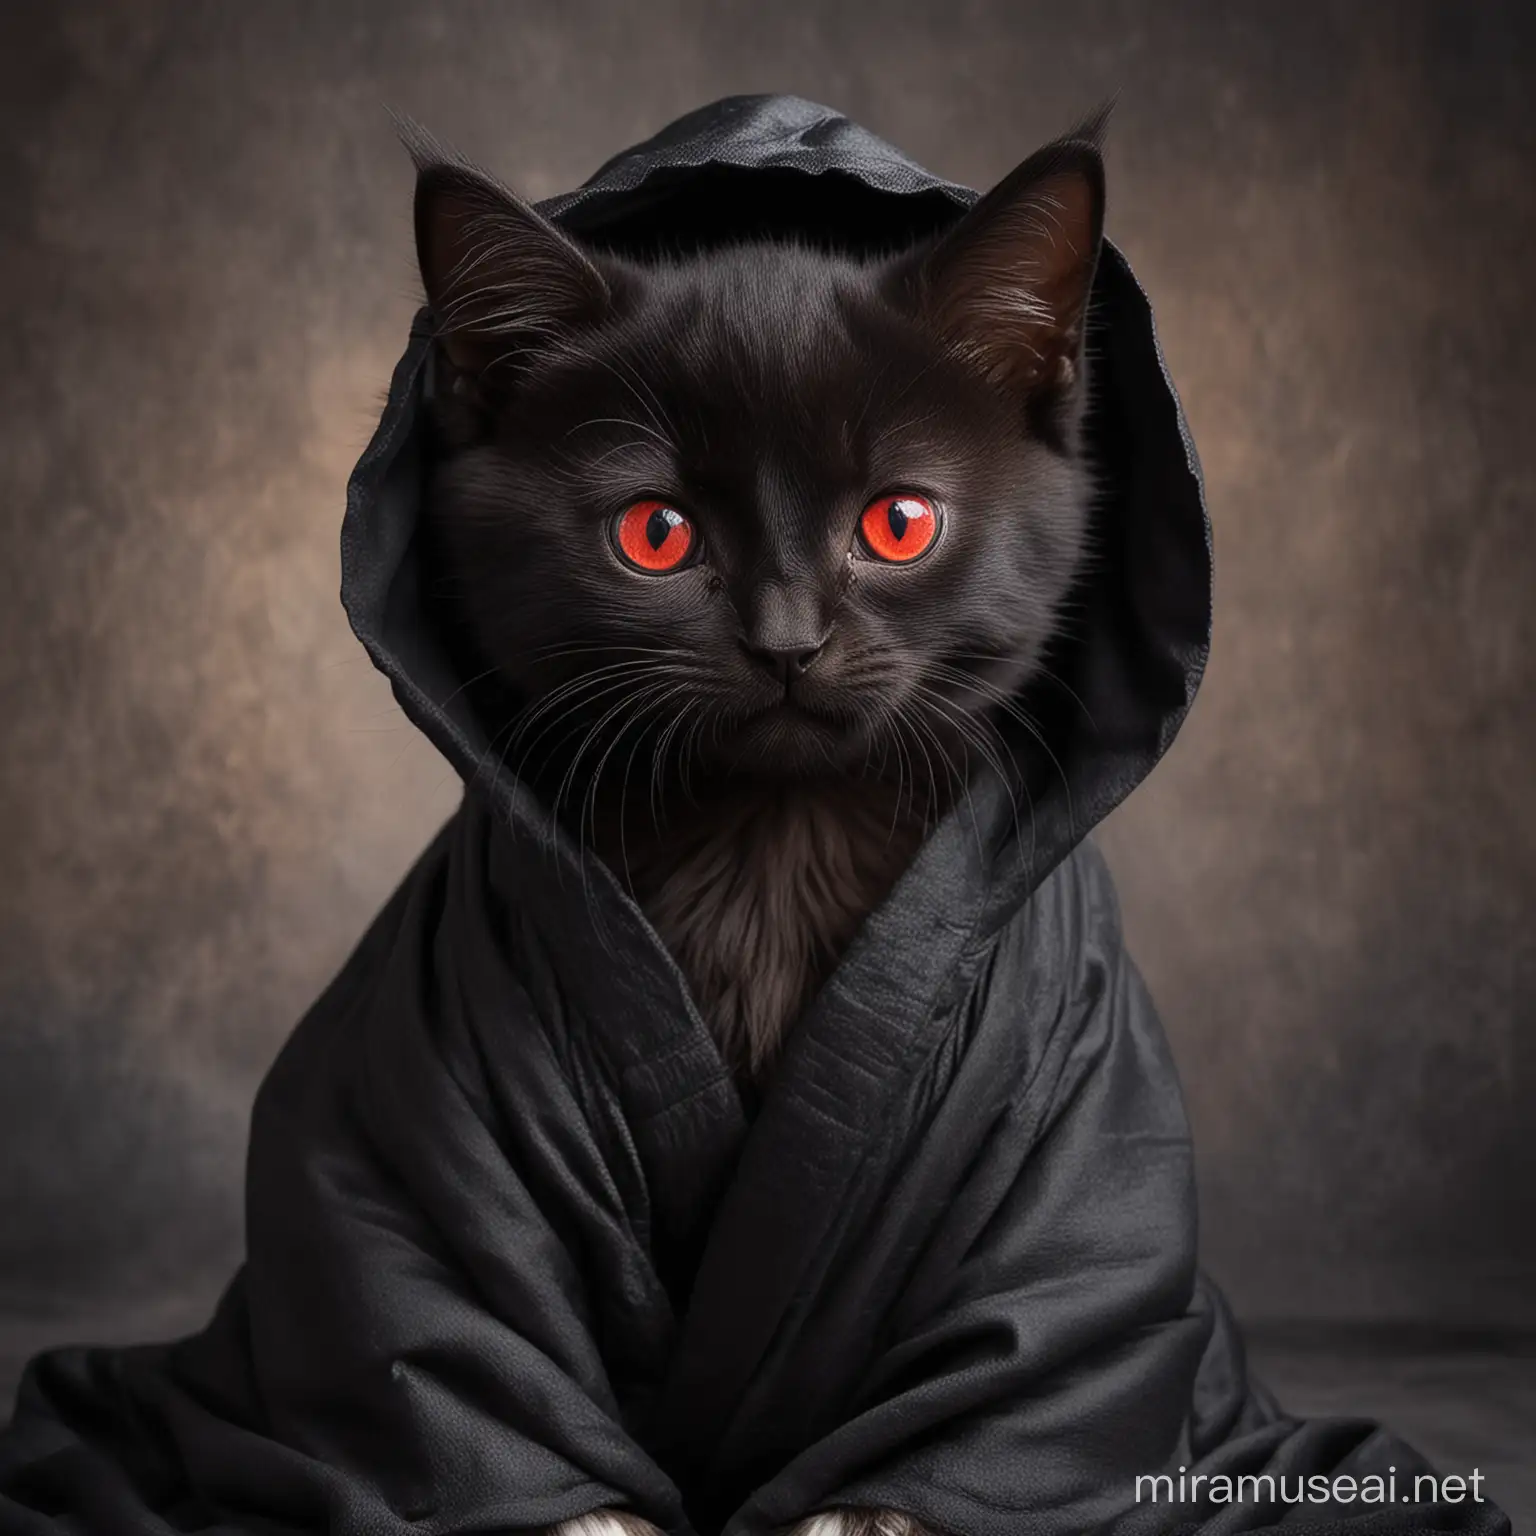 Adorable black kitten in robes woth red eyes